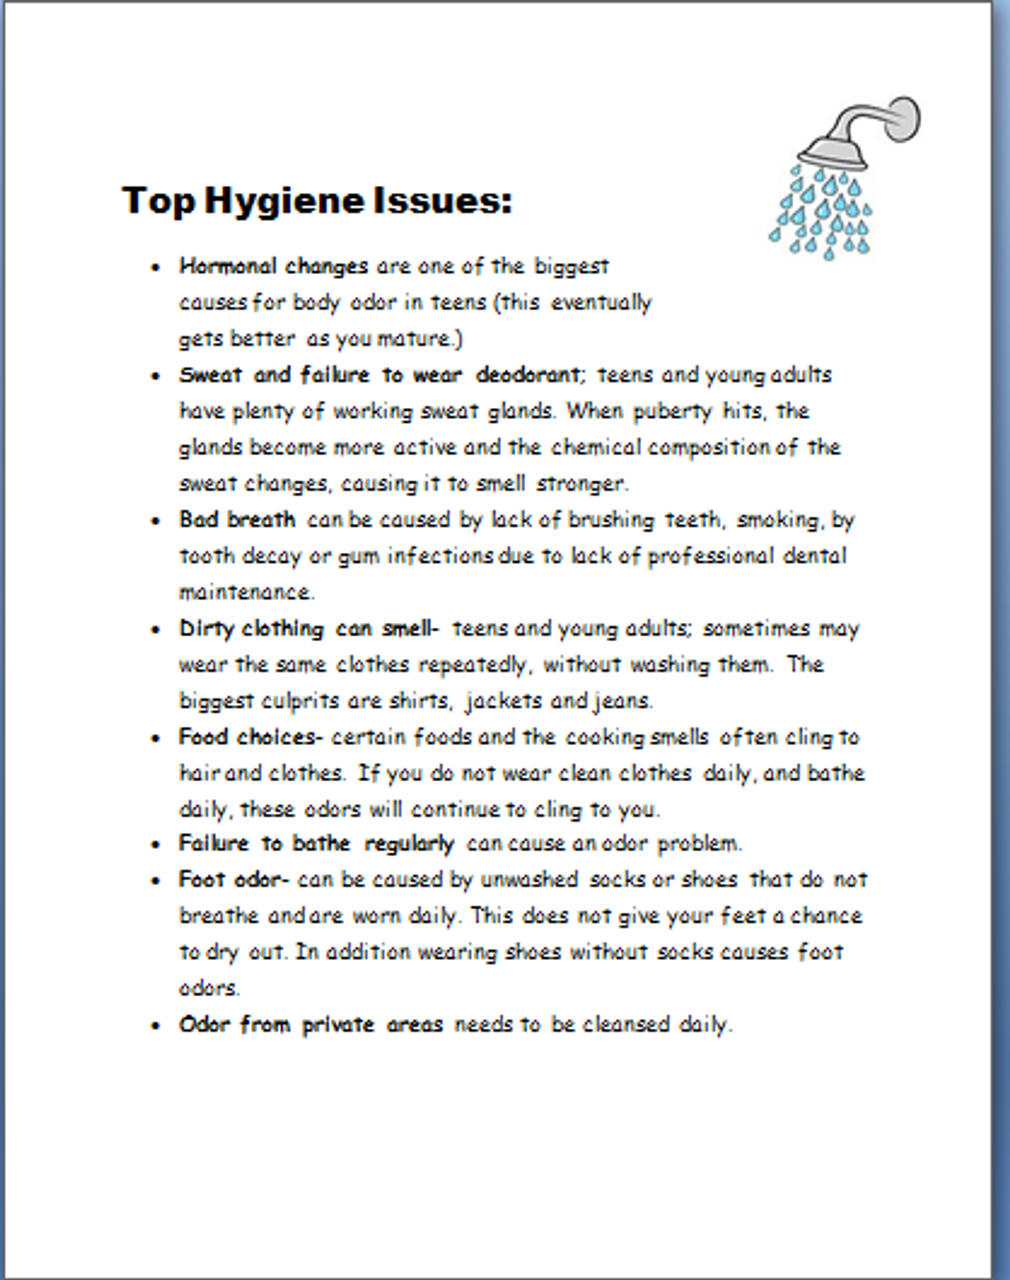 Hygiene Issues- Teen Lifestyle Guide